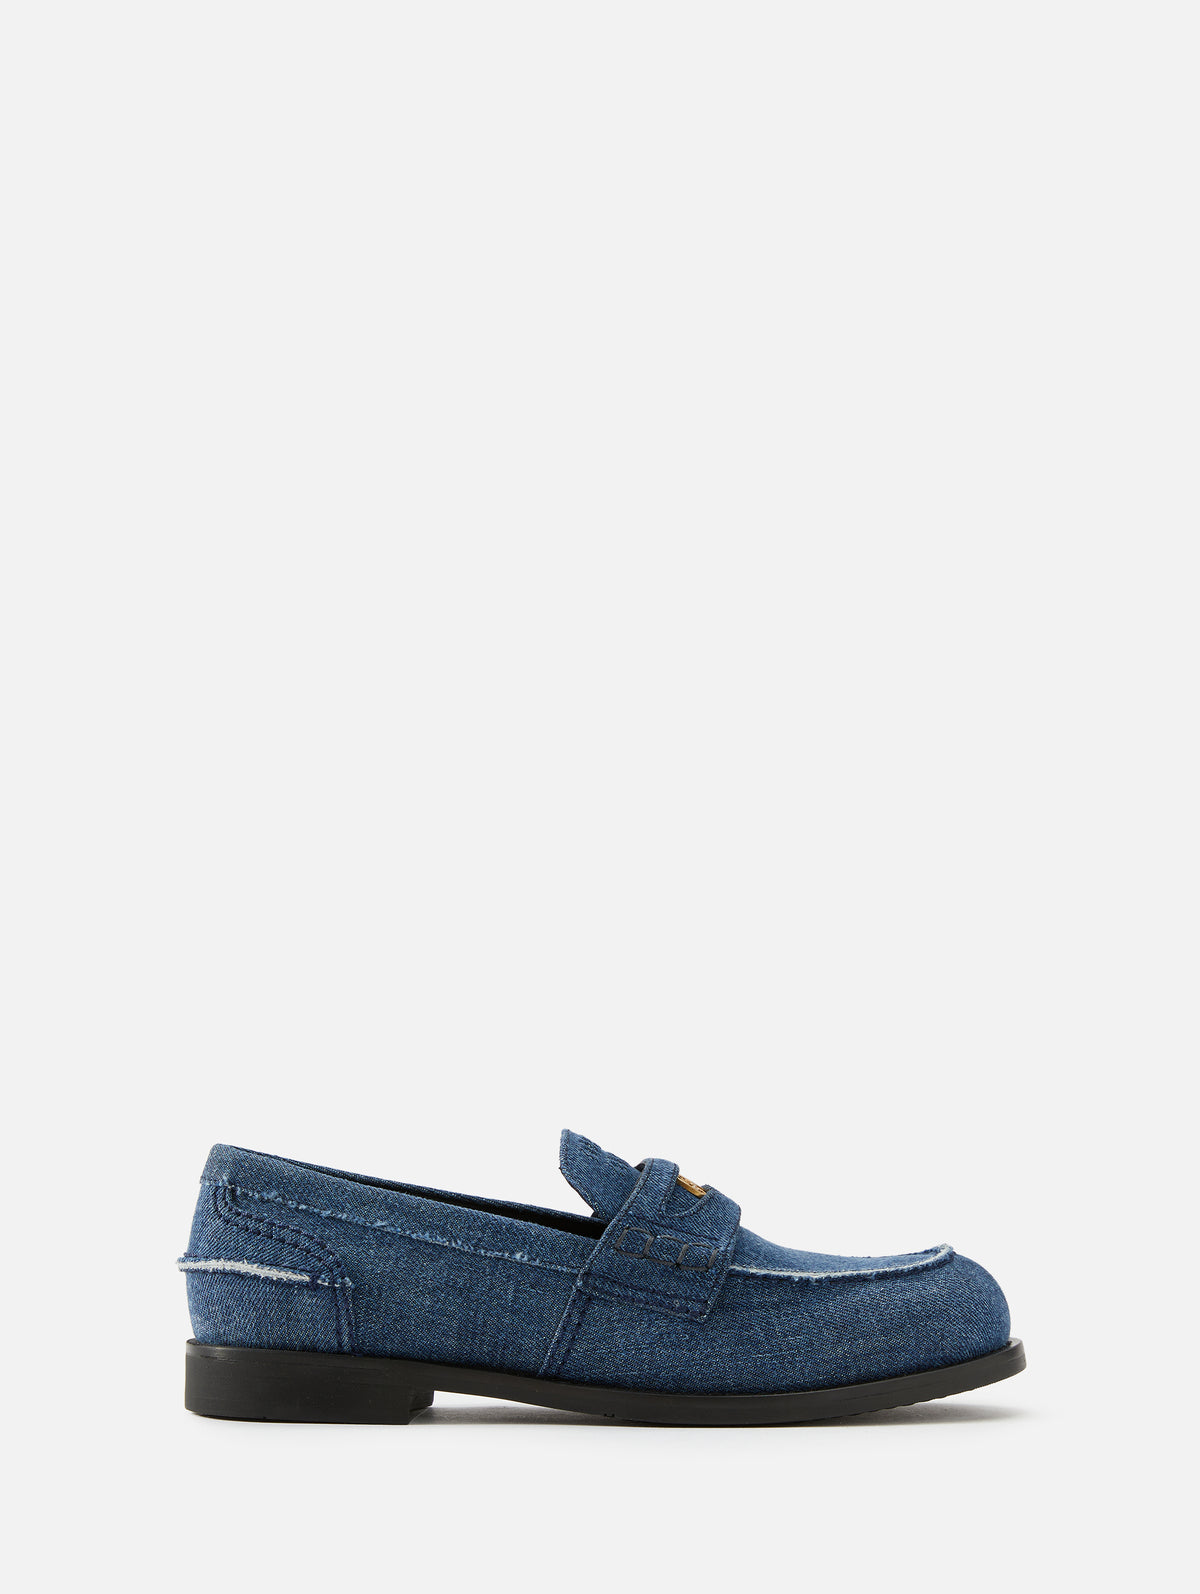 view 1 - Penny Loafer